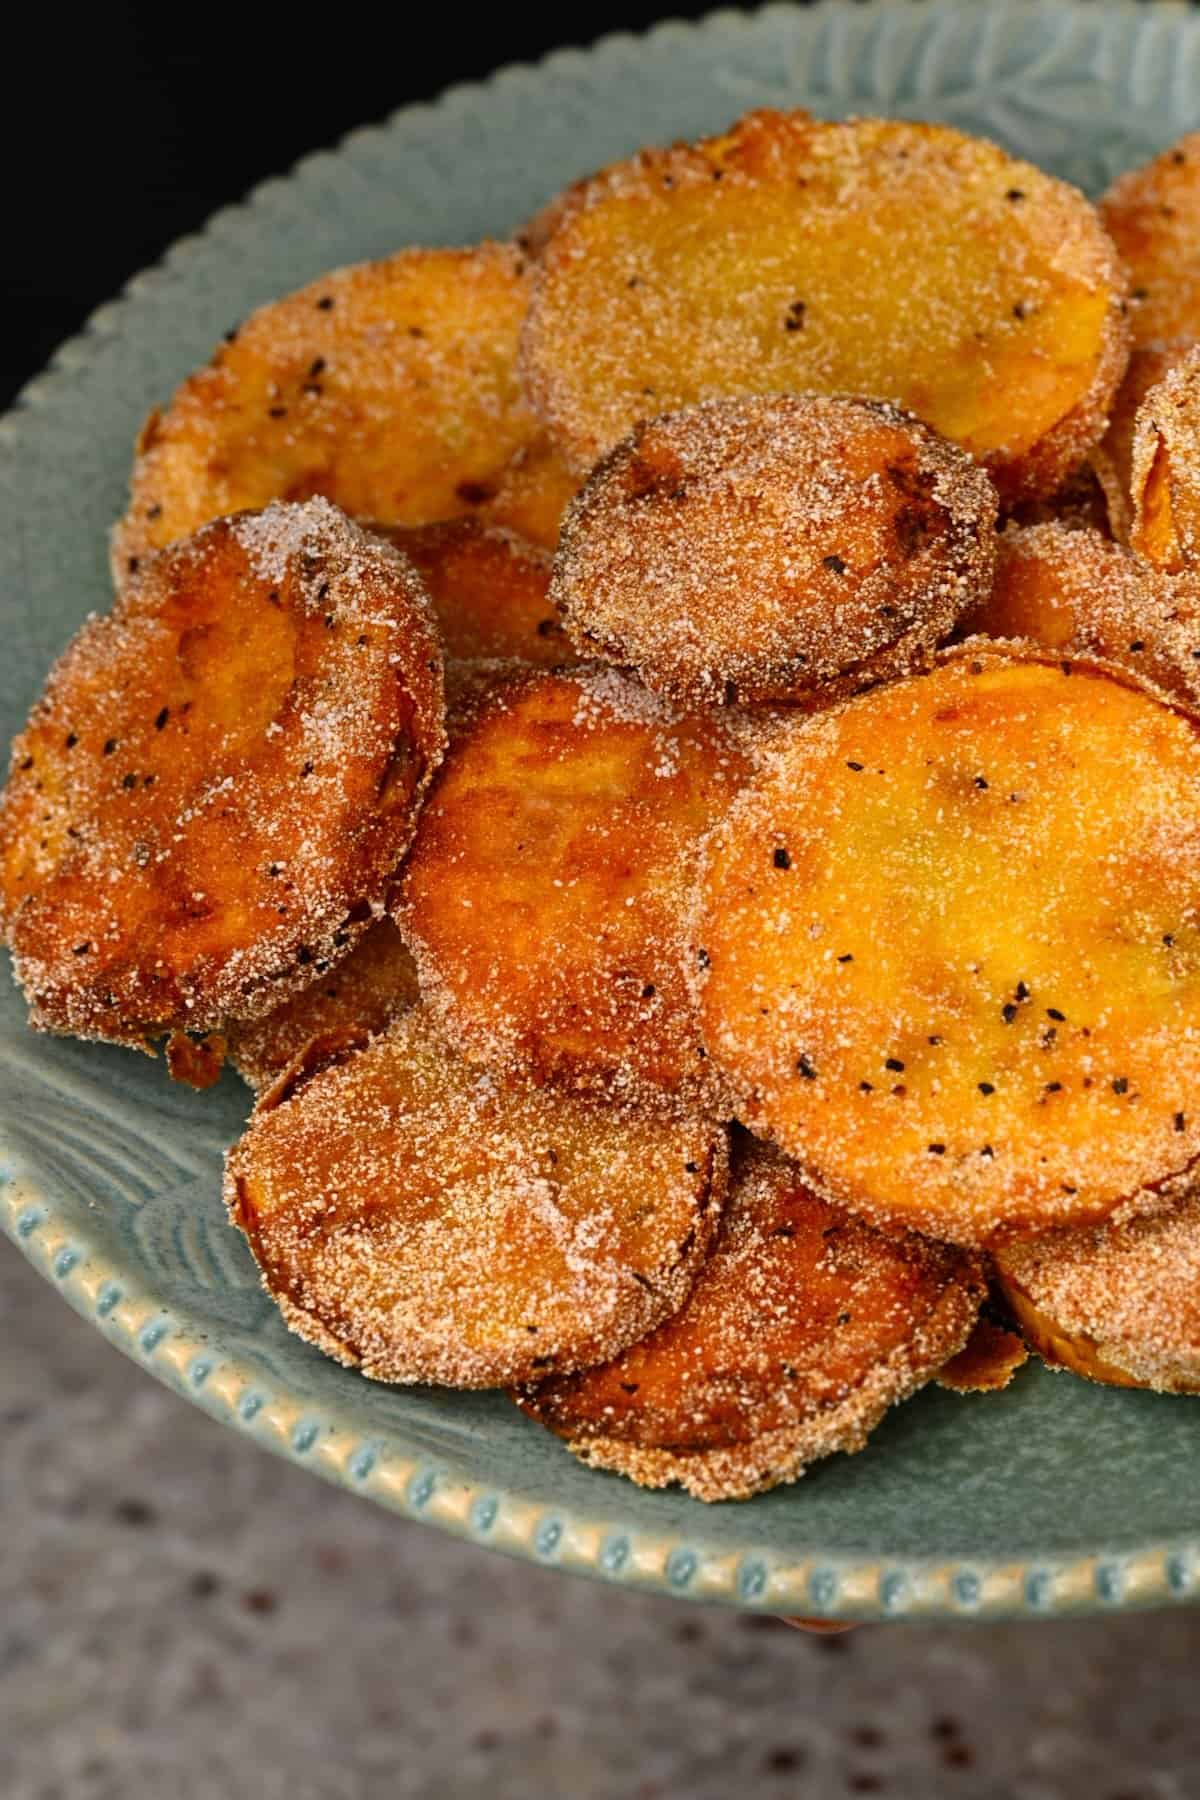 Freshly fried slices of yelloe squash on a plate